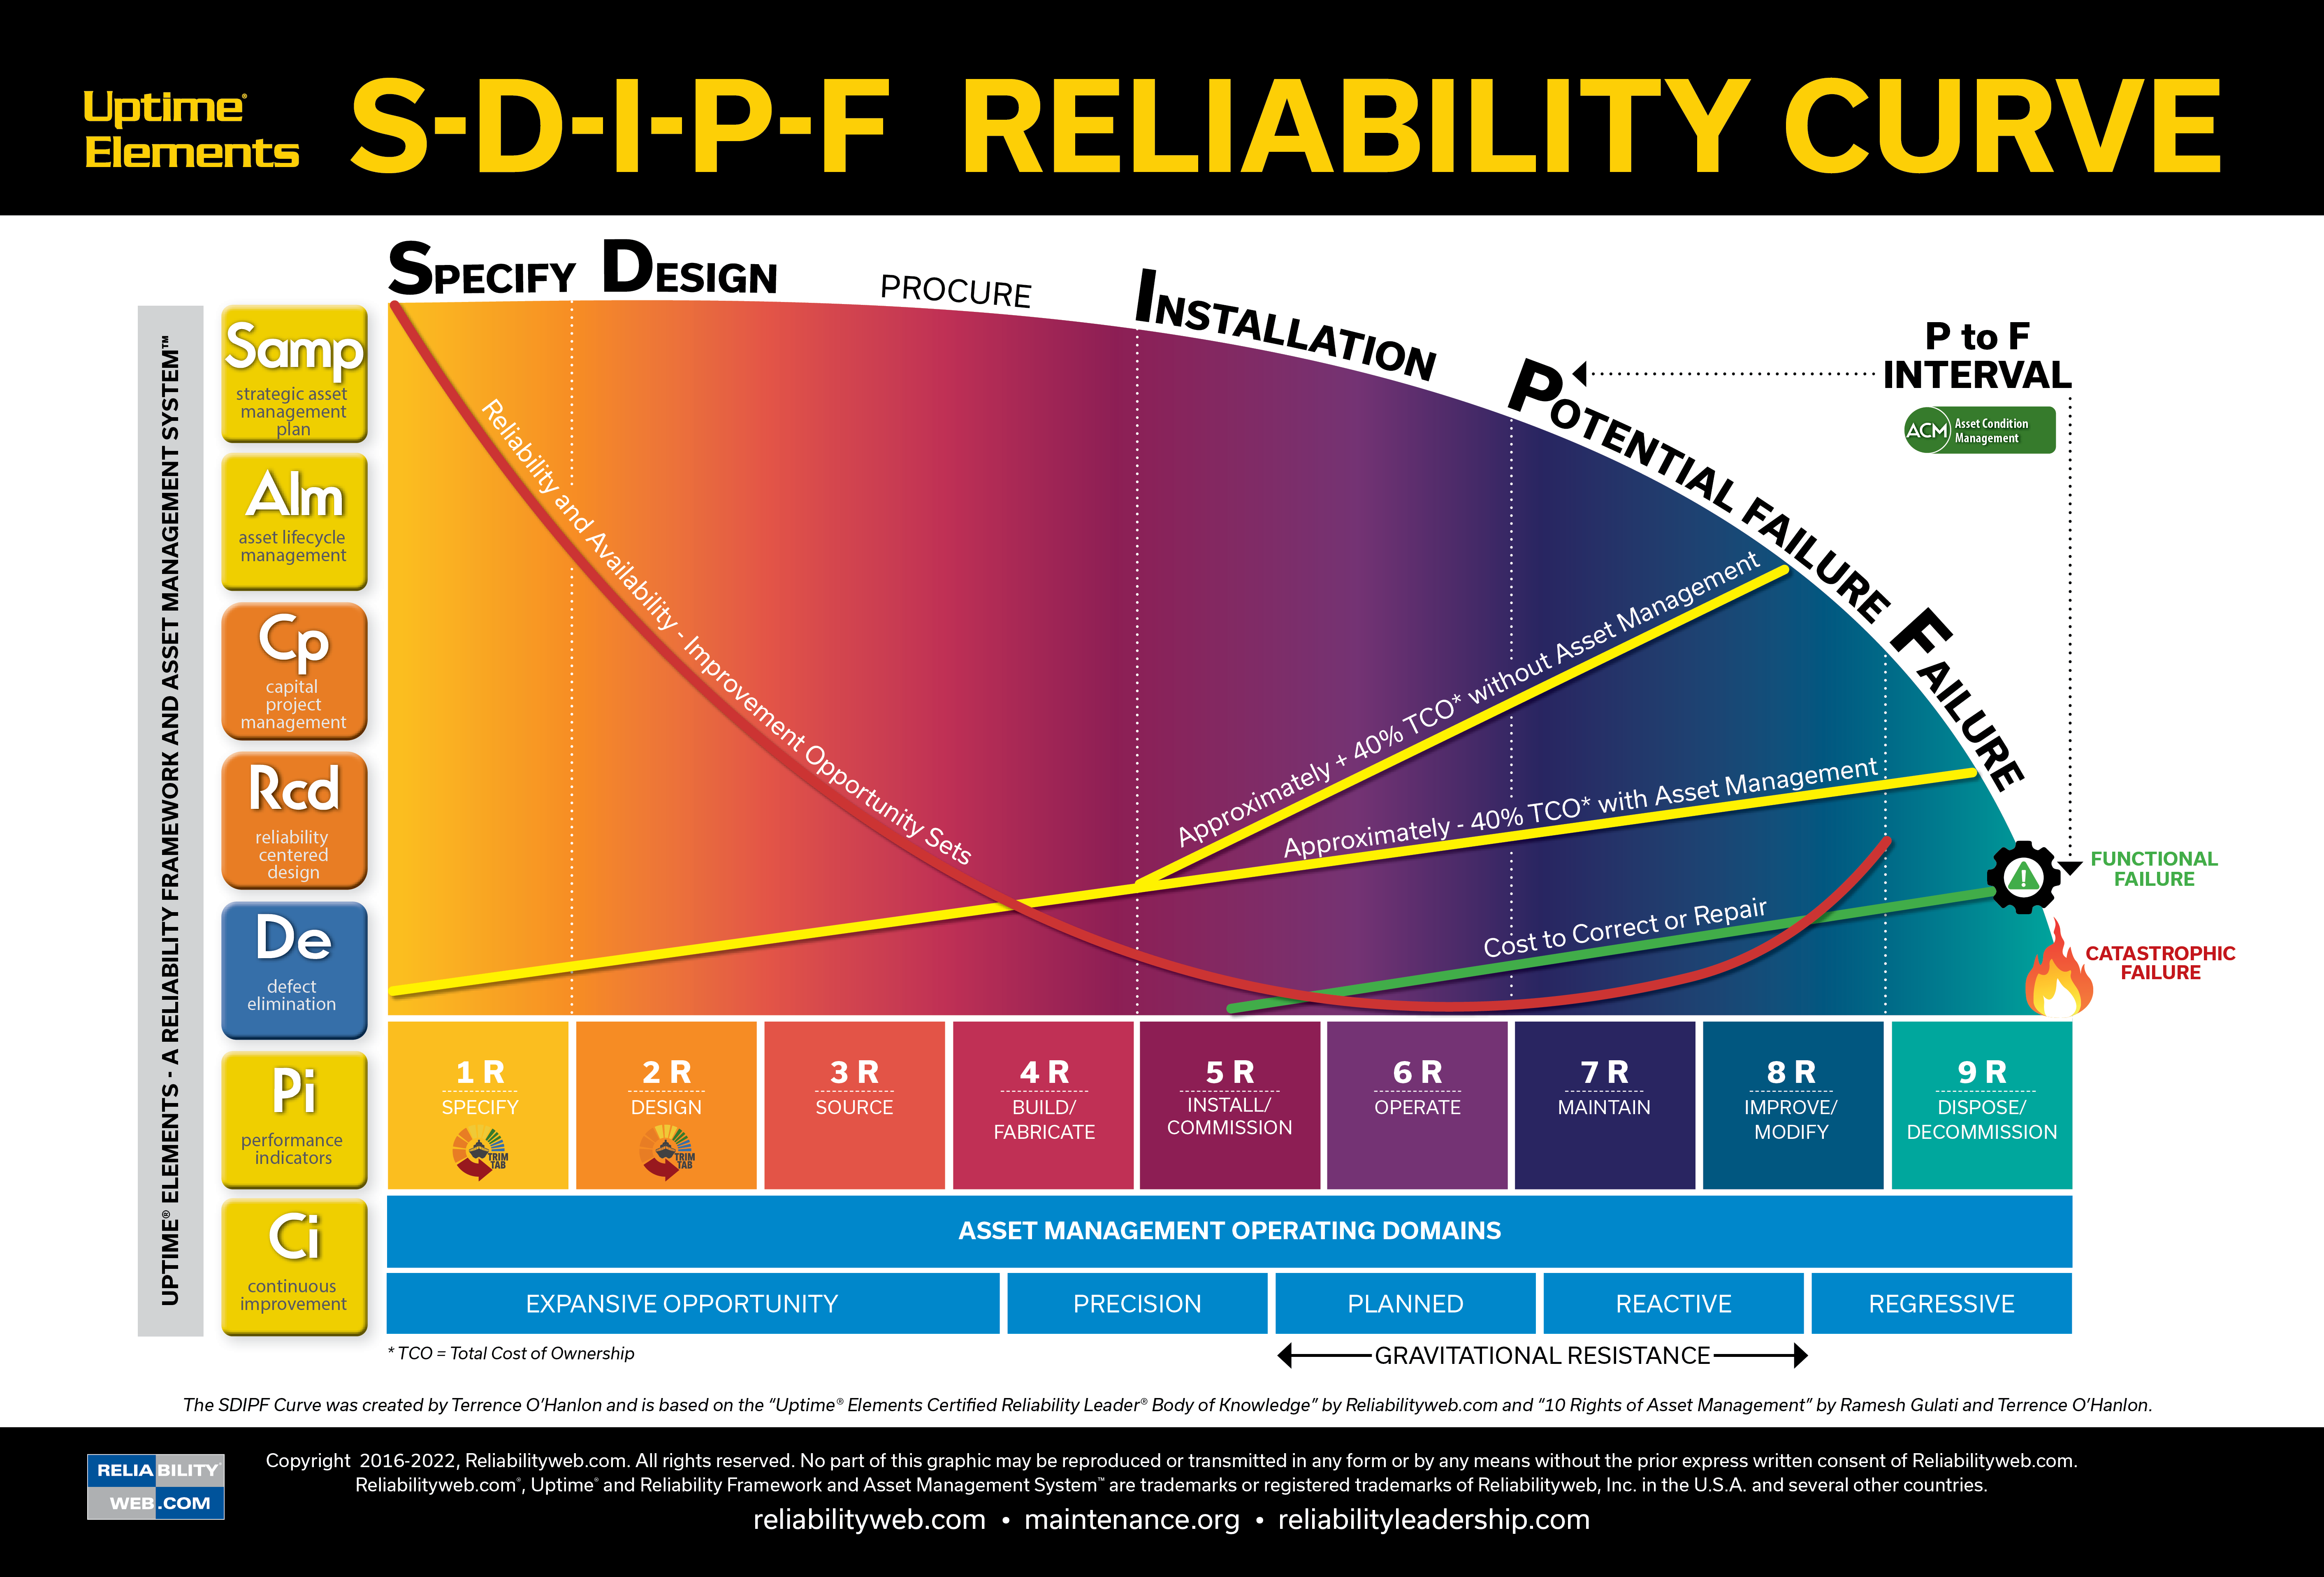 The Introduction of the SDIPF Reliability Curve